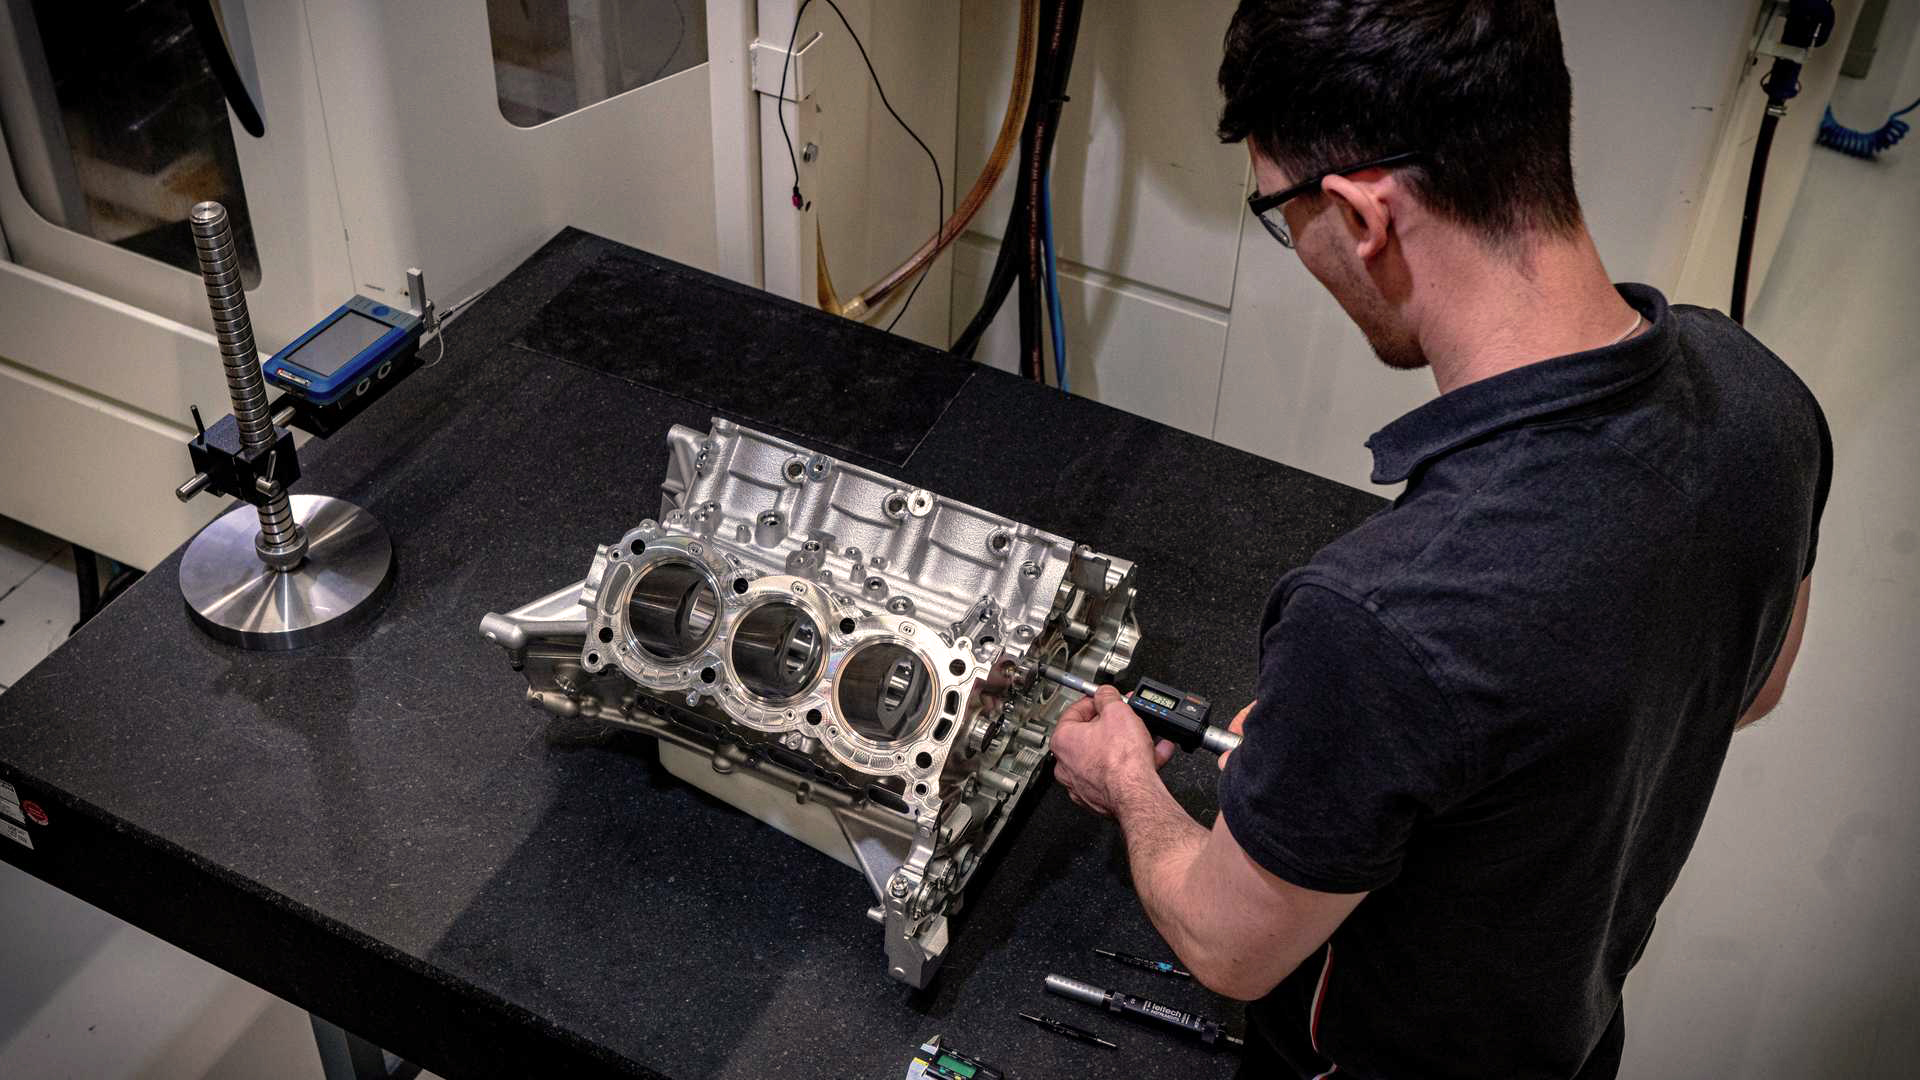 Although it may not sound realistic, this tiny heat engine is capable of generating 670 cv of power at 11,000 rpm